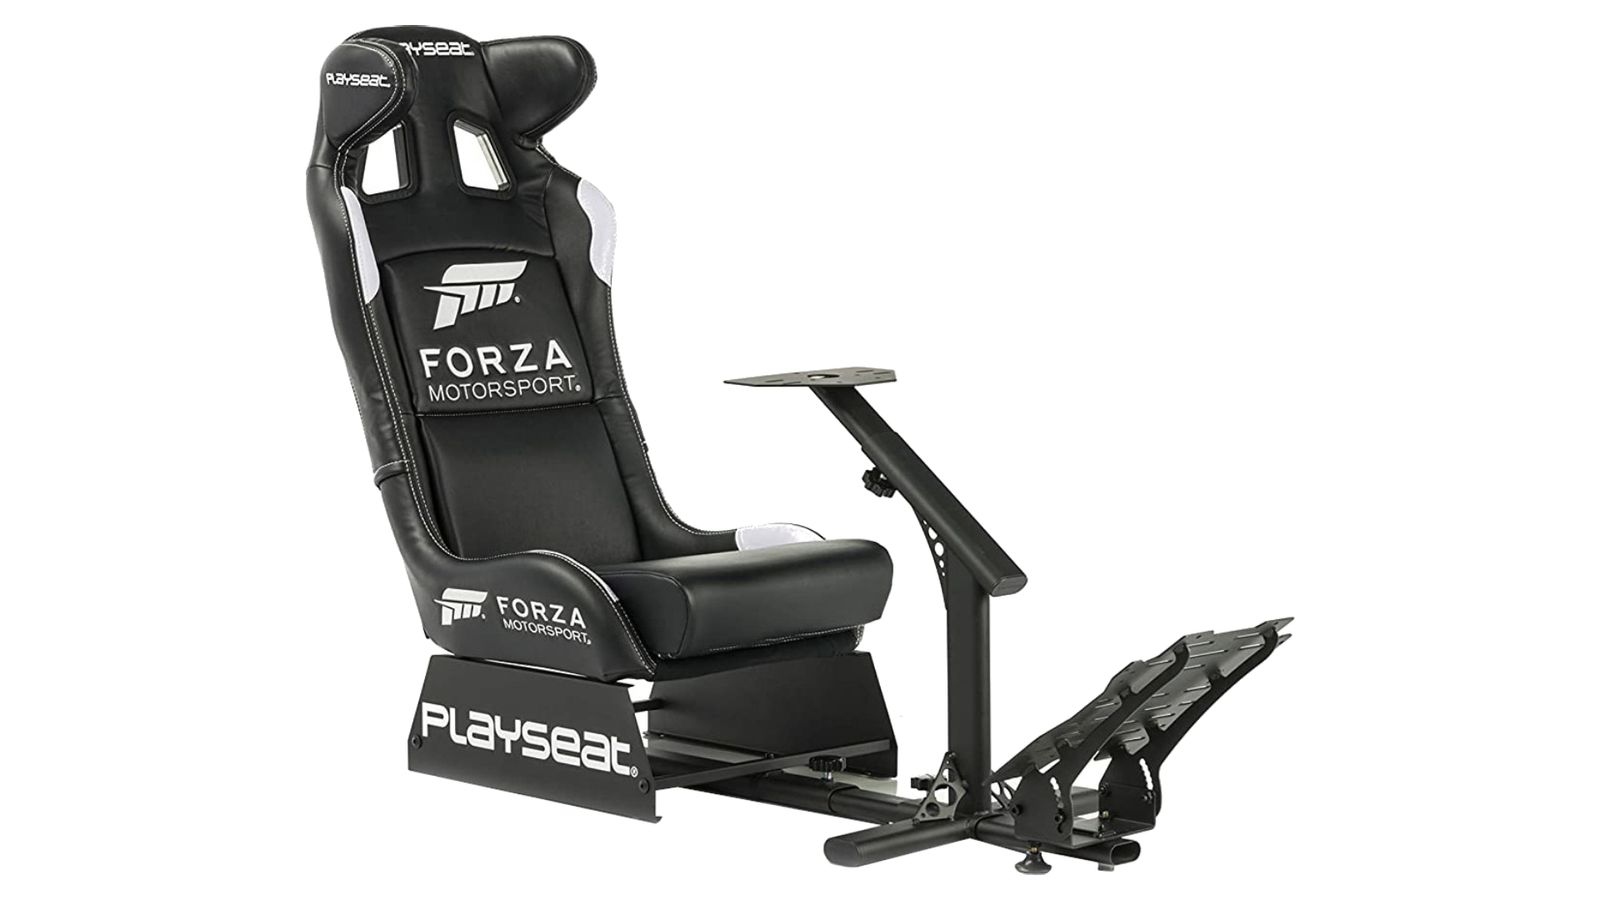 Playseat Forza Motorsport Pro product image of a black racing seat and wheel and pedal stand featuring white Forza branding.